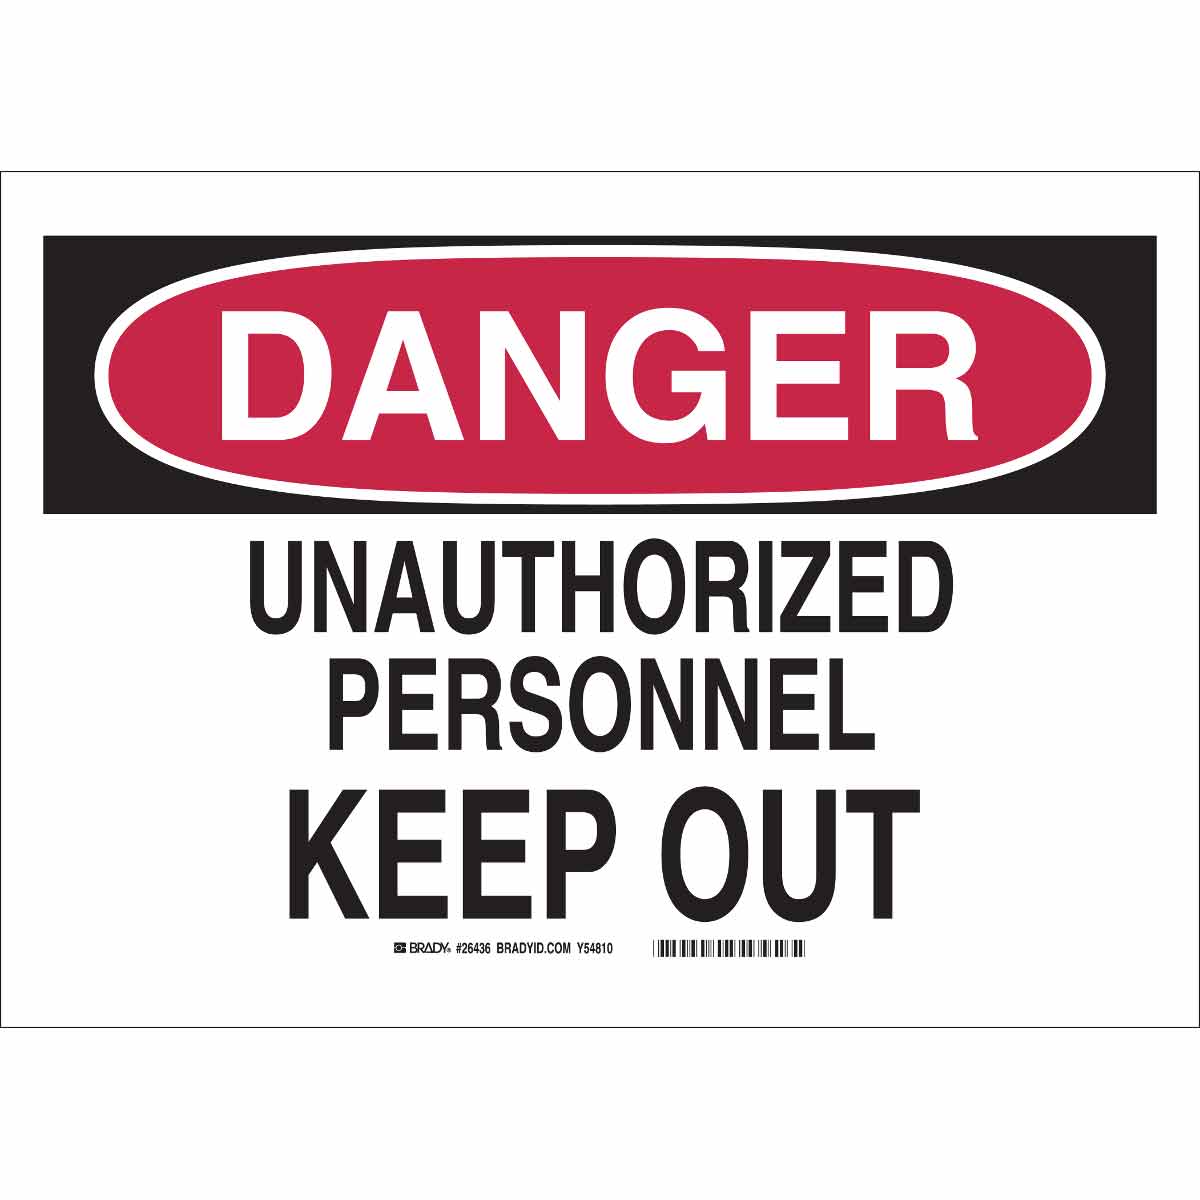 UNAUTHORIZED PERSON